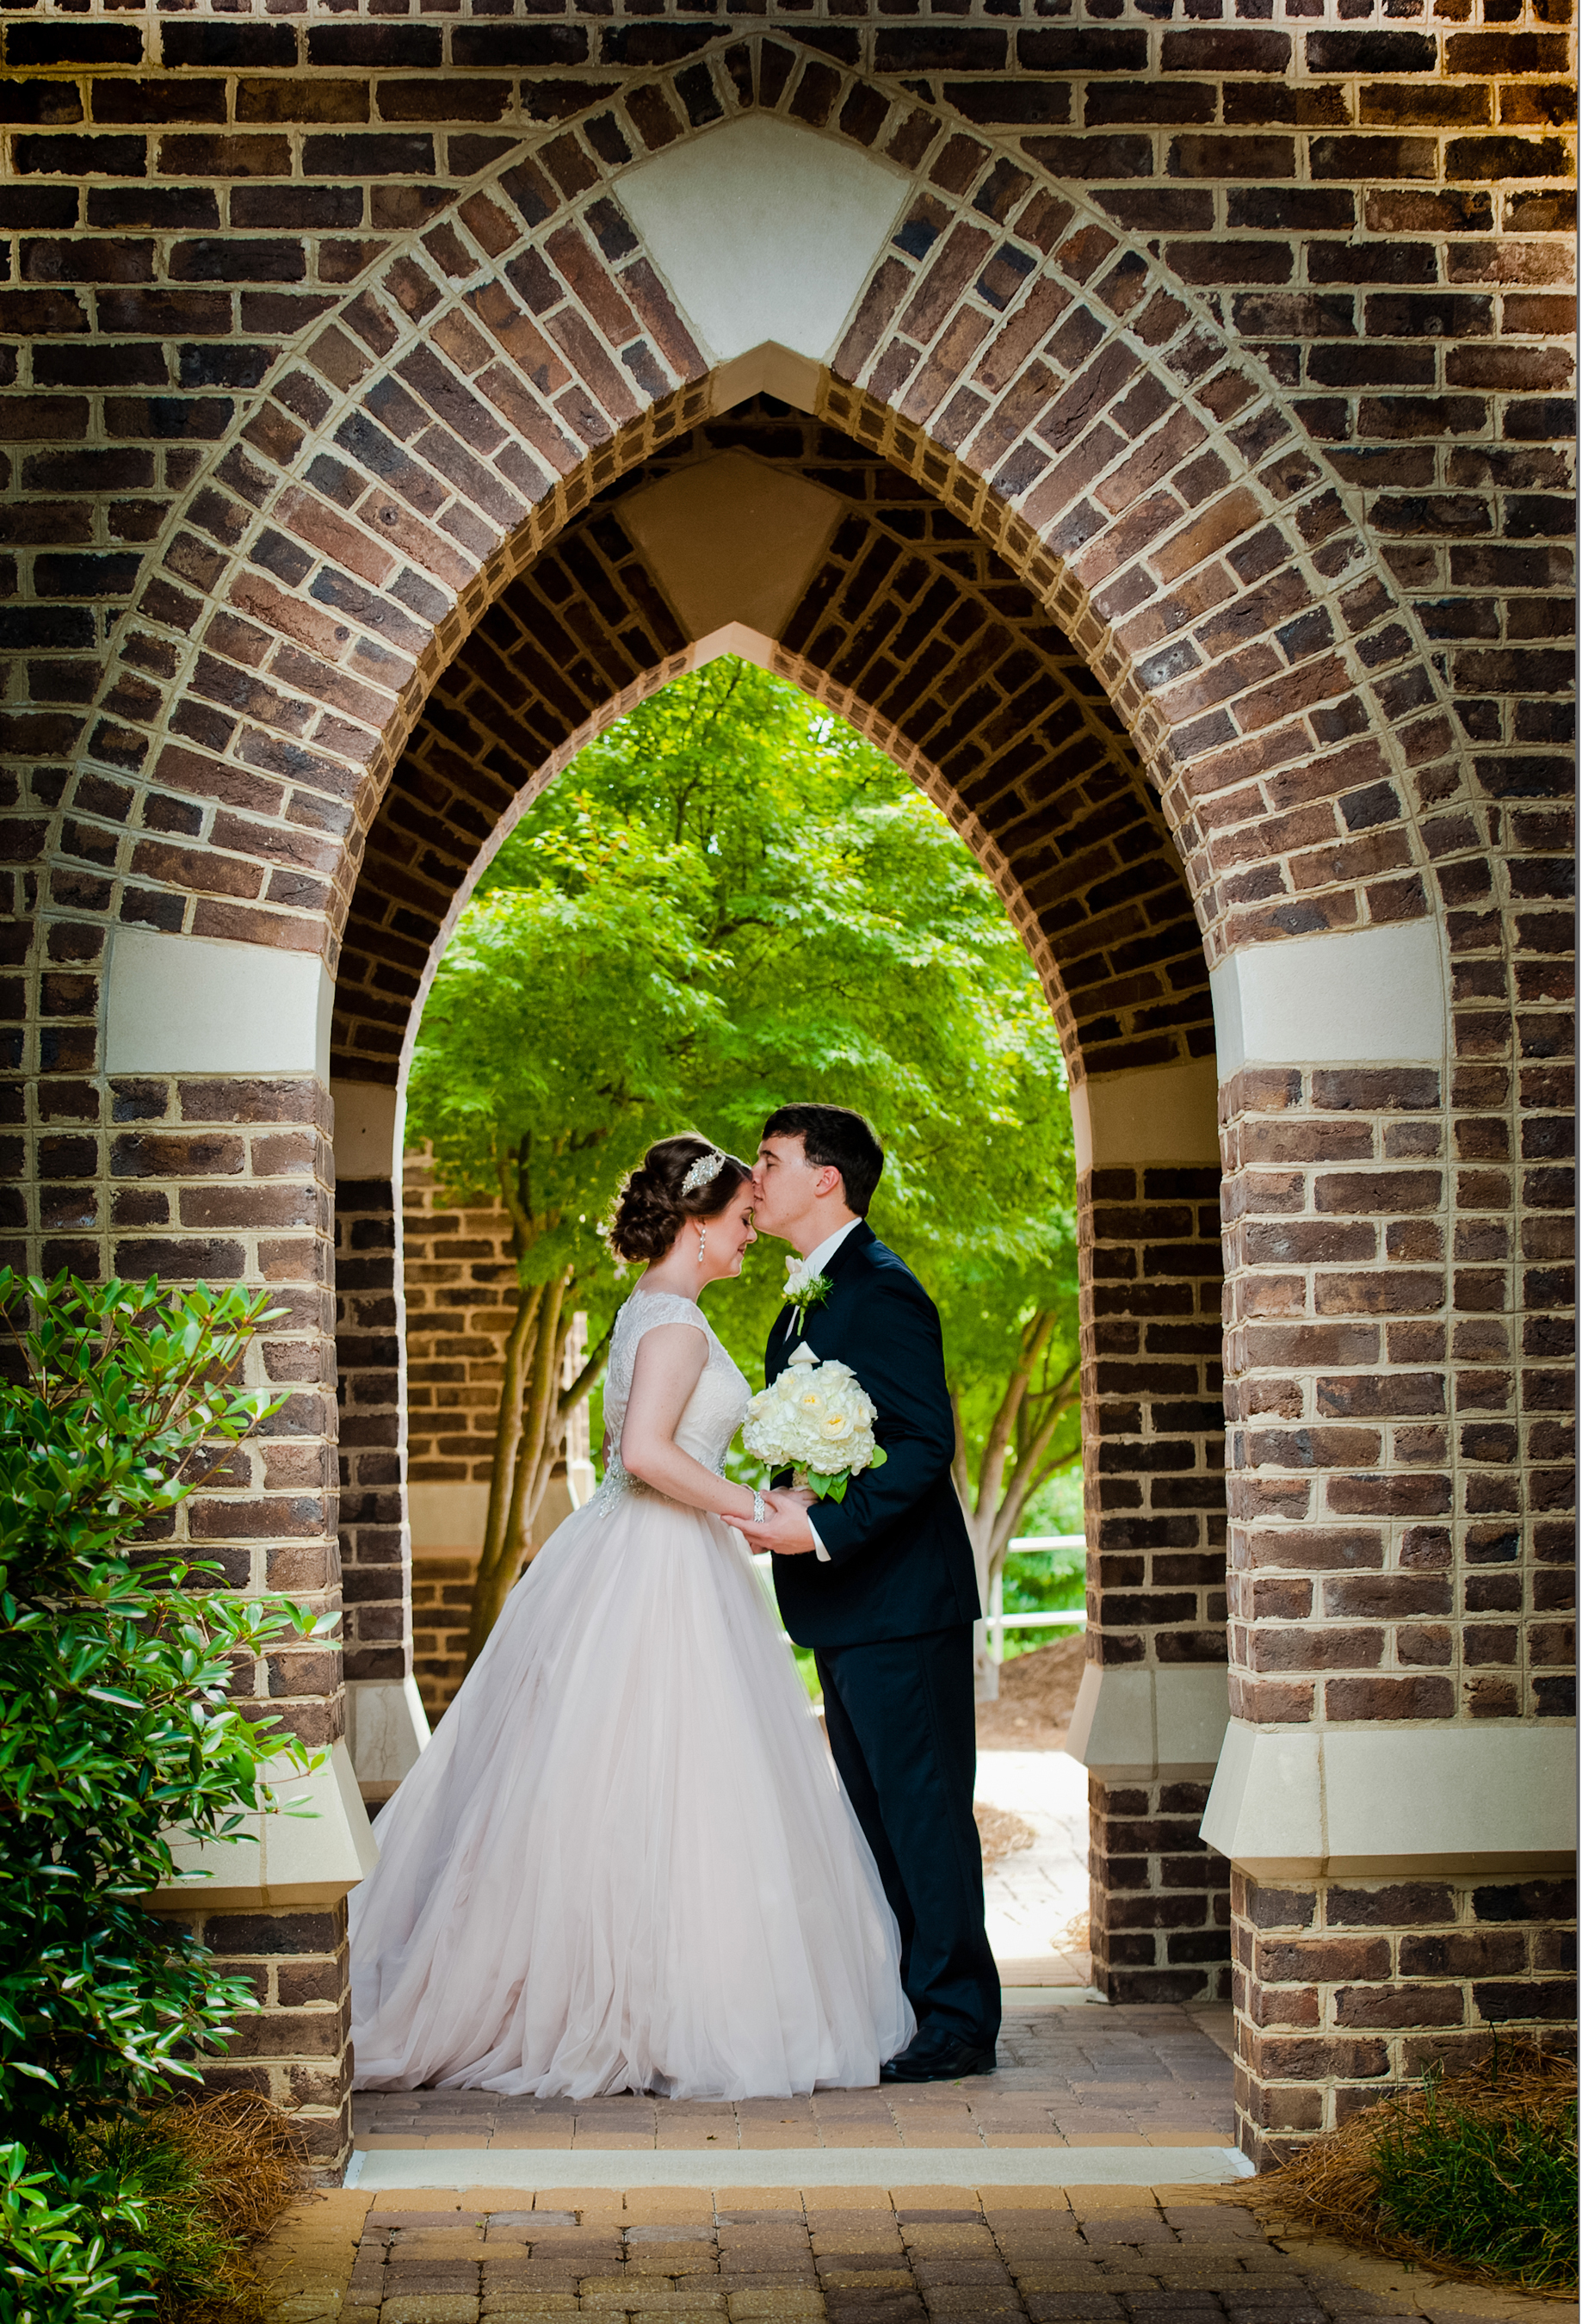 Bride and groom standing in an outdoor archway